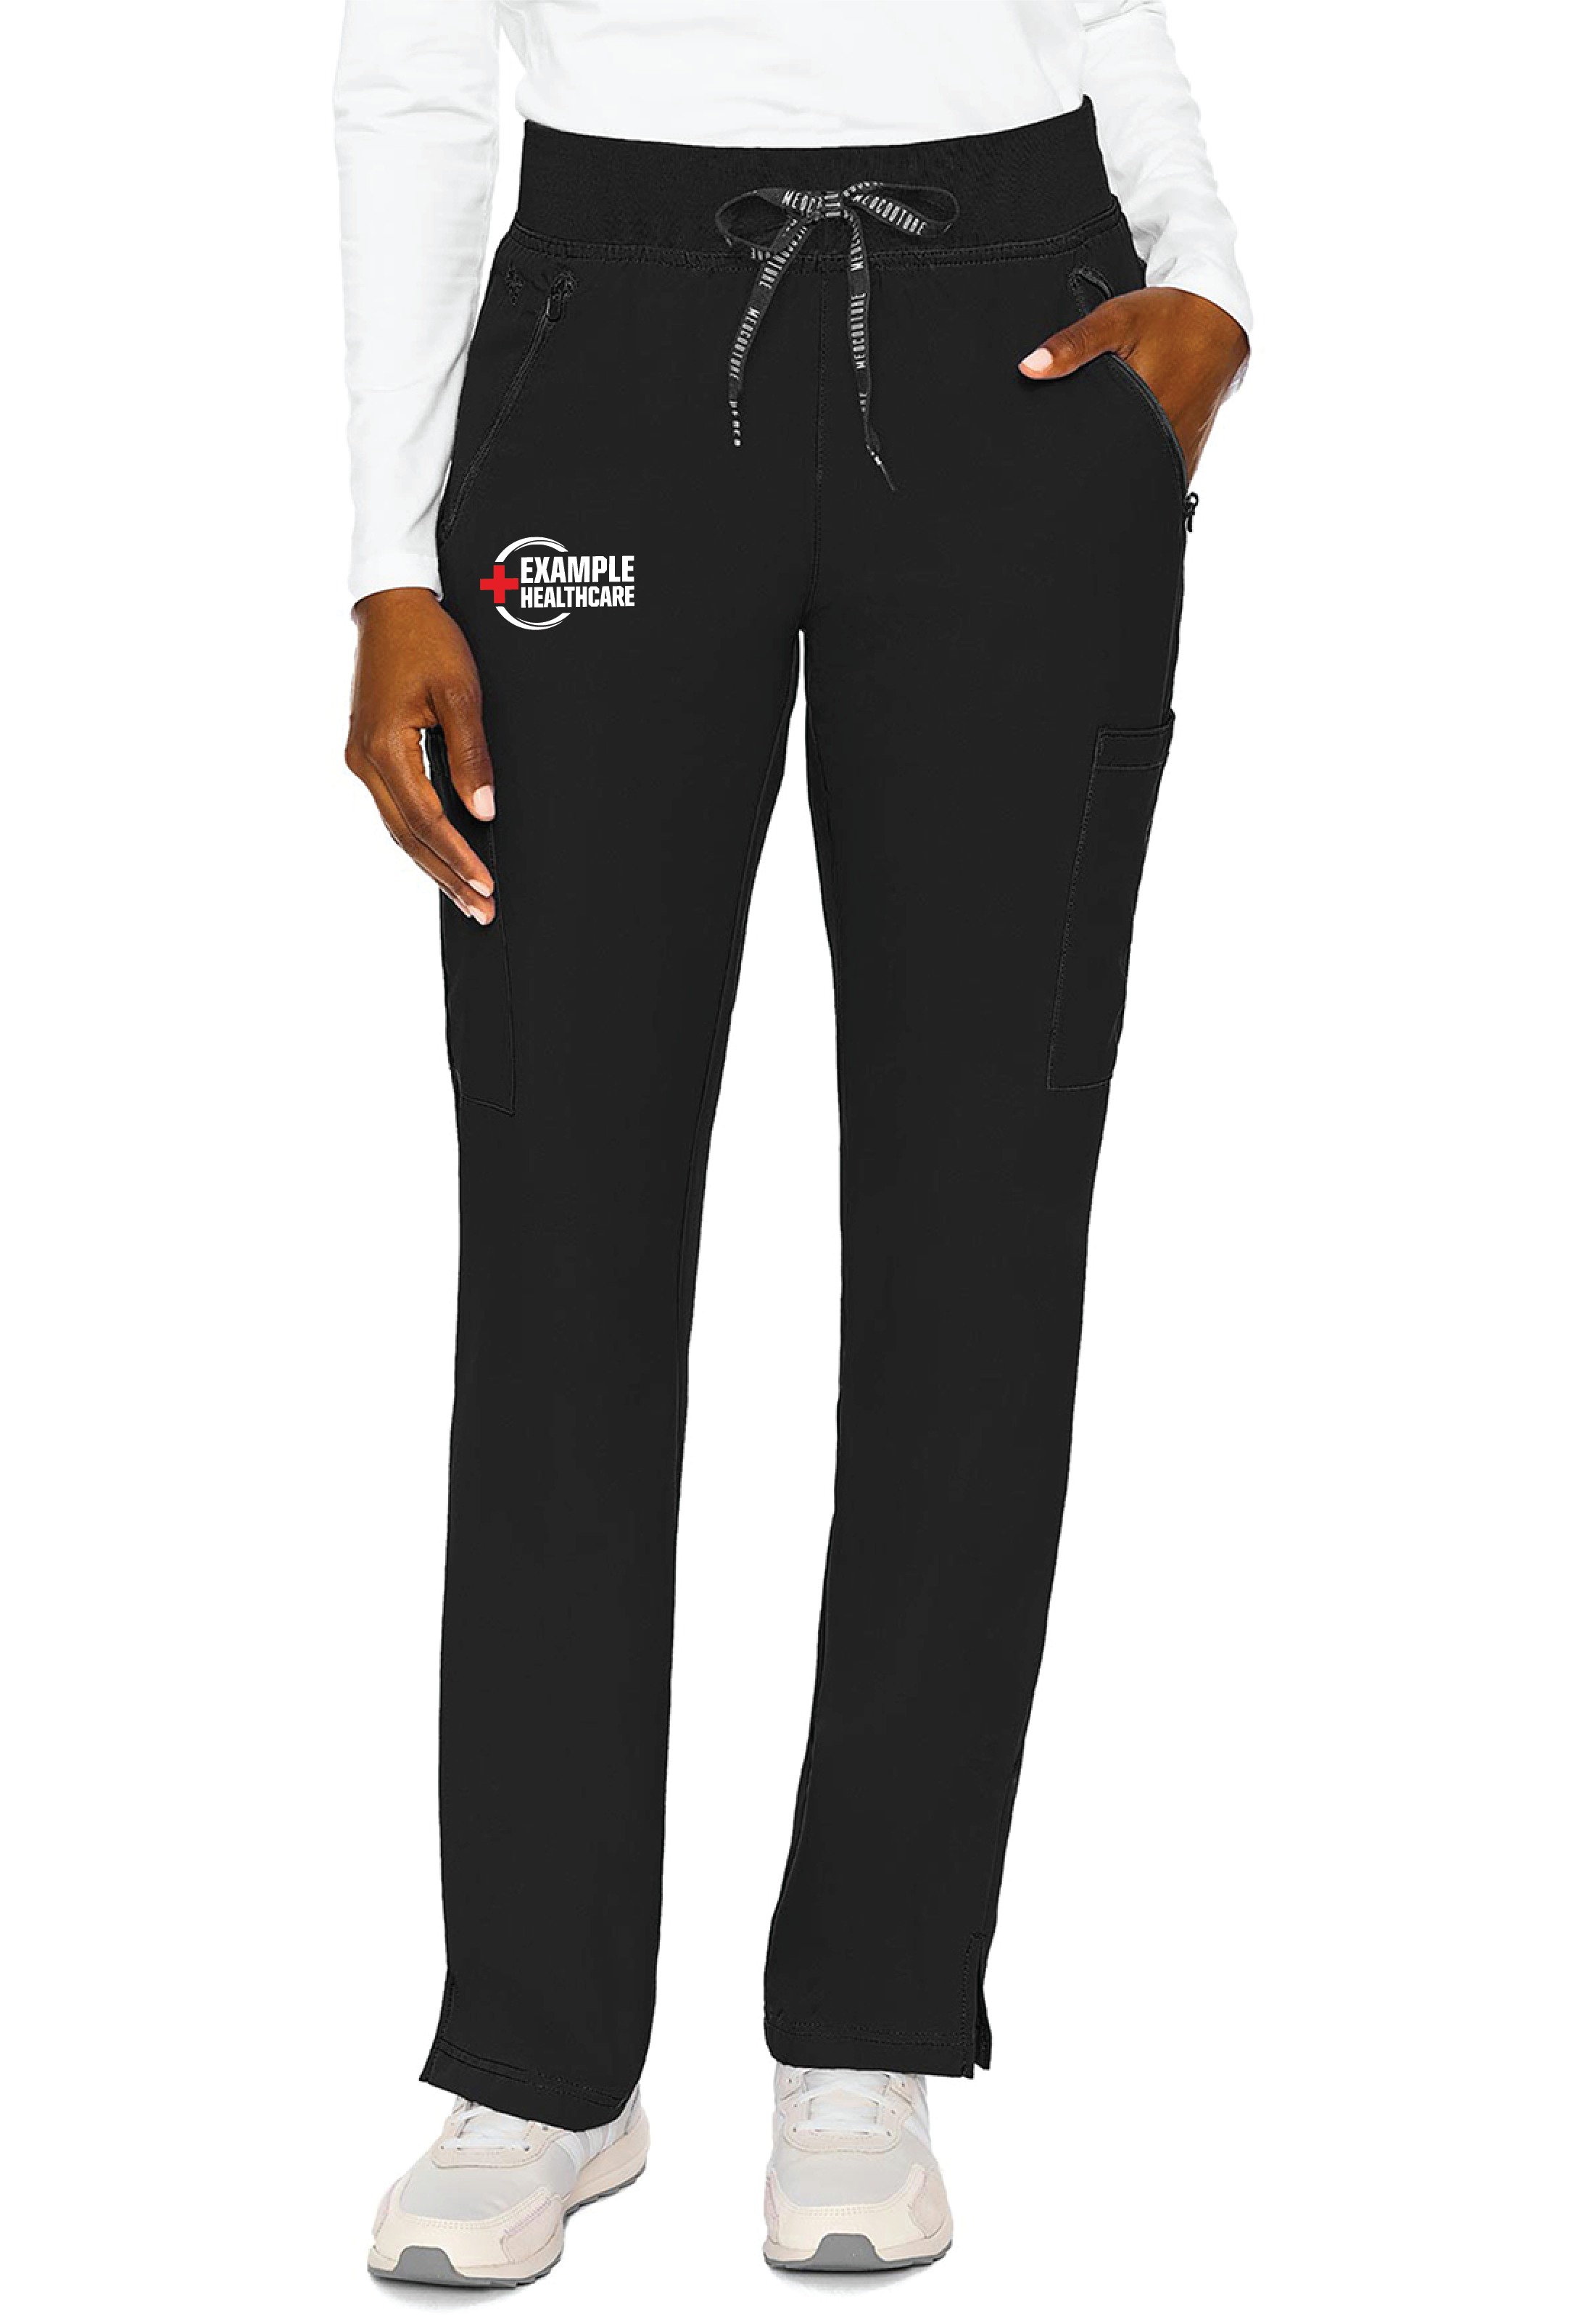 Women's Med Couture Insight Zipper Pocket Pant (w/ Example Embroidery)